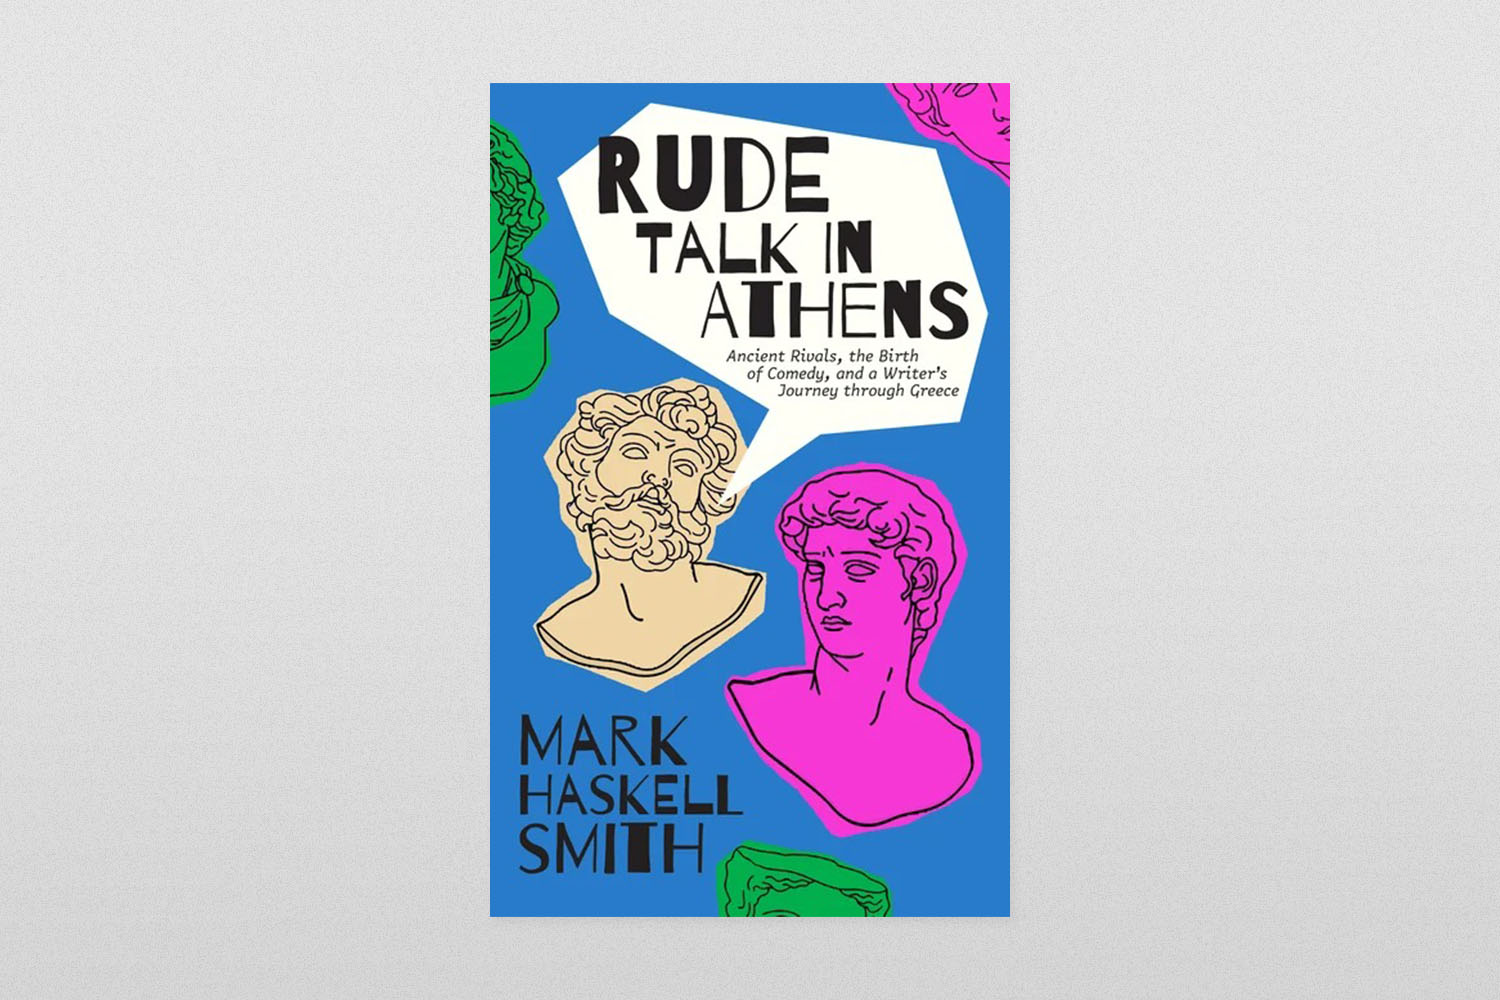 Rude Talk in Athens